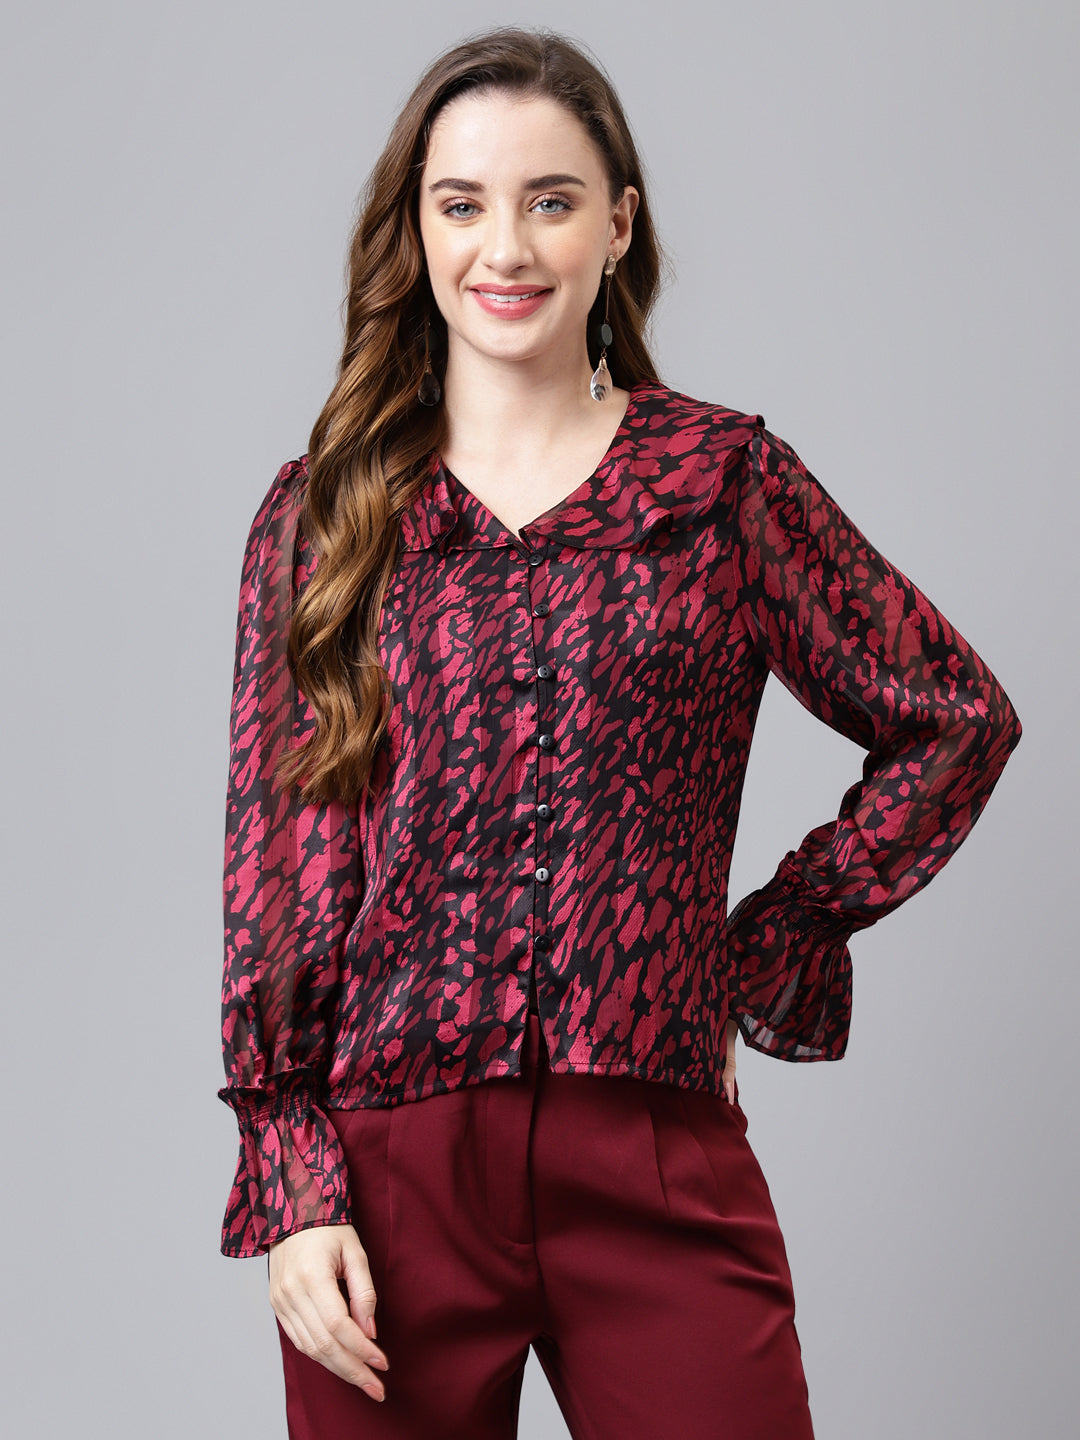 Maroon Full Sleeve Collar Neck Printed Women Blouse Top for Casual